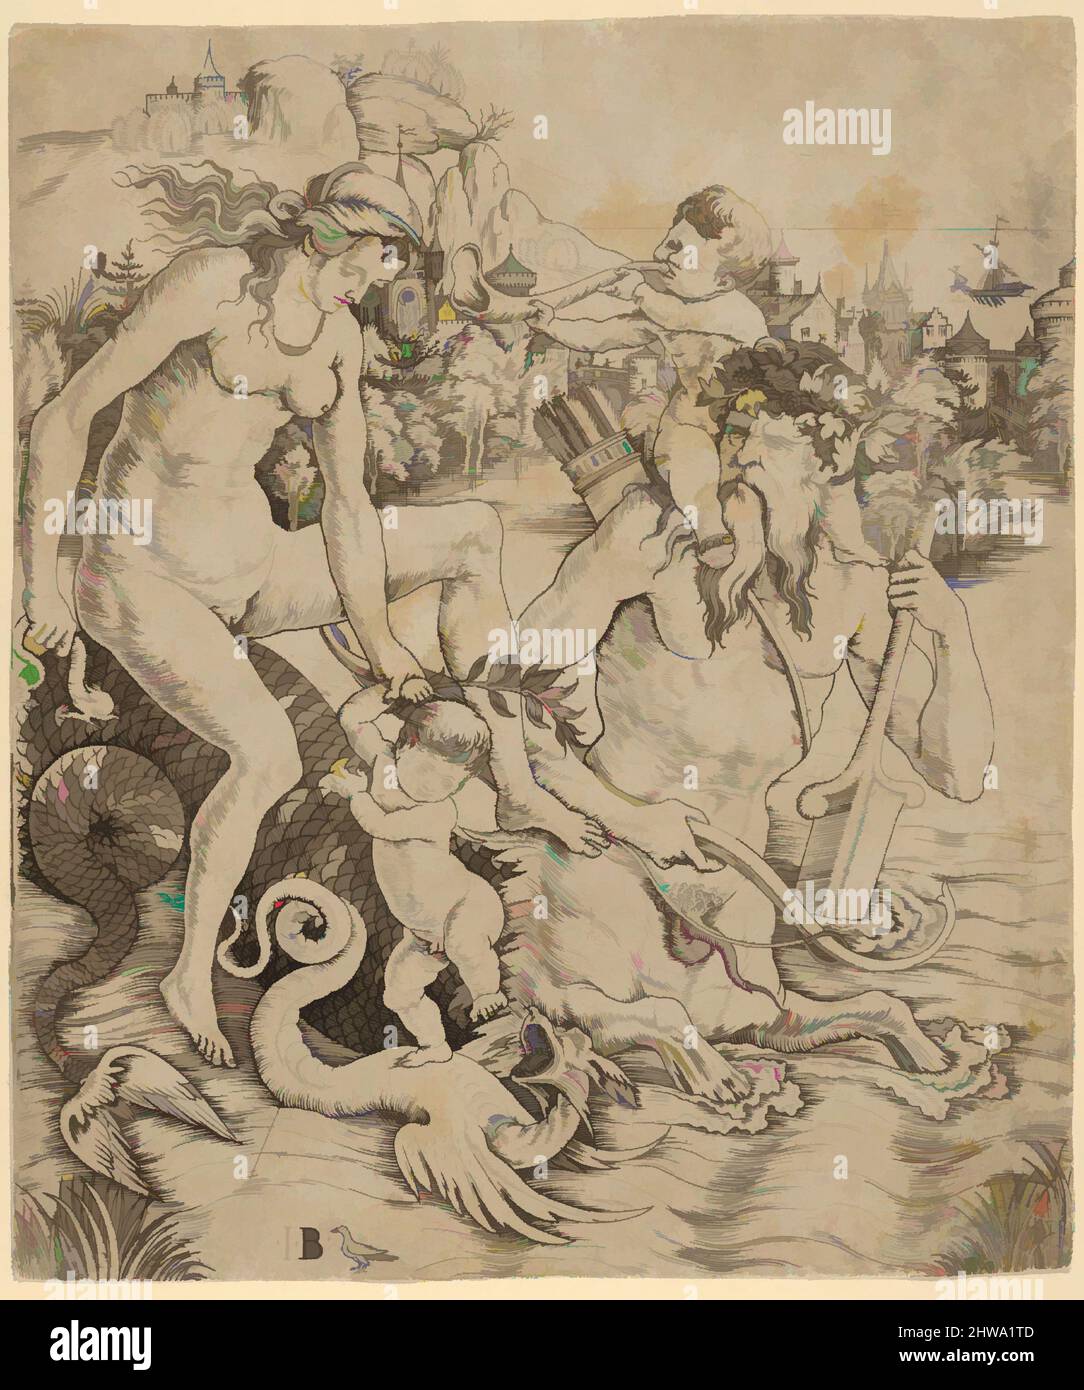 Art inspired by Drawings and Prints, A triton family in the sea, with a mother and child seated on the back of a half-man, half-sea monster, Classic works modernized by Artotop with a splash of modernity. Shapes, color and value, eye-catching visual impact on art. Emotions through freedom of artworks in a contemporary way. A timeless message pursuing a wildly creative new direction. Artists turning to the digital medium and creating the Artotop NFT Stock Photo